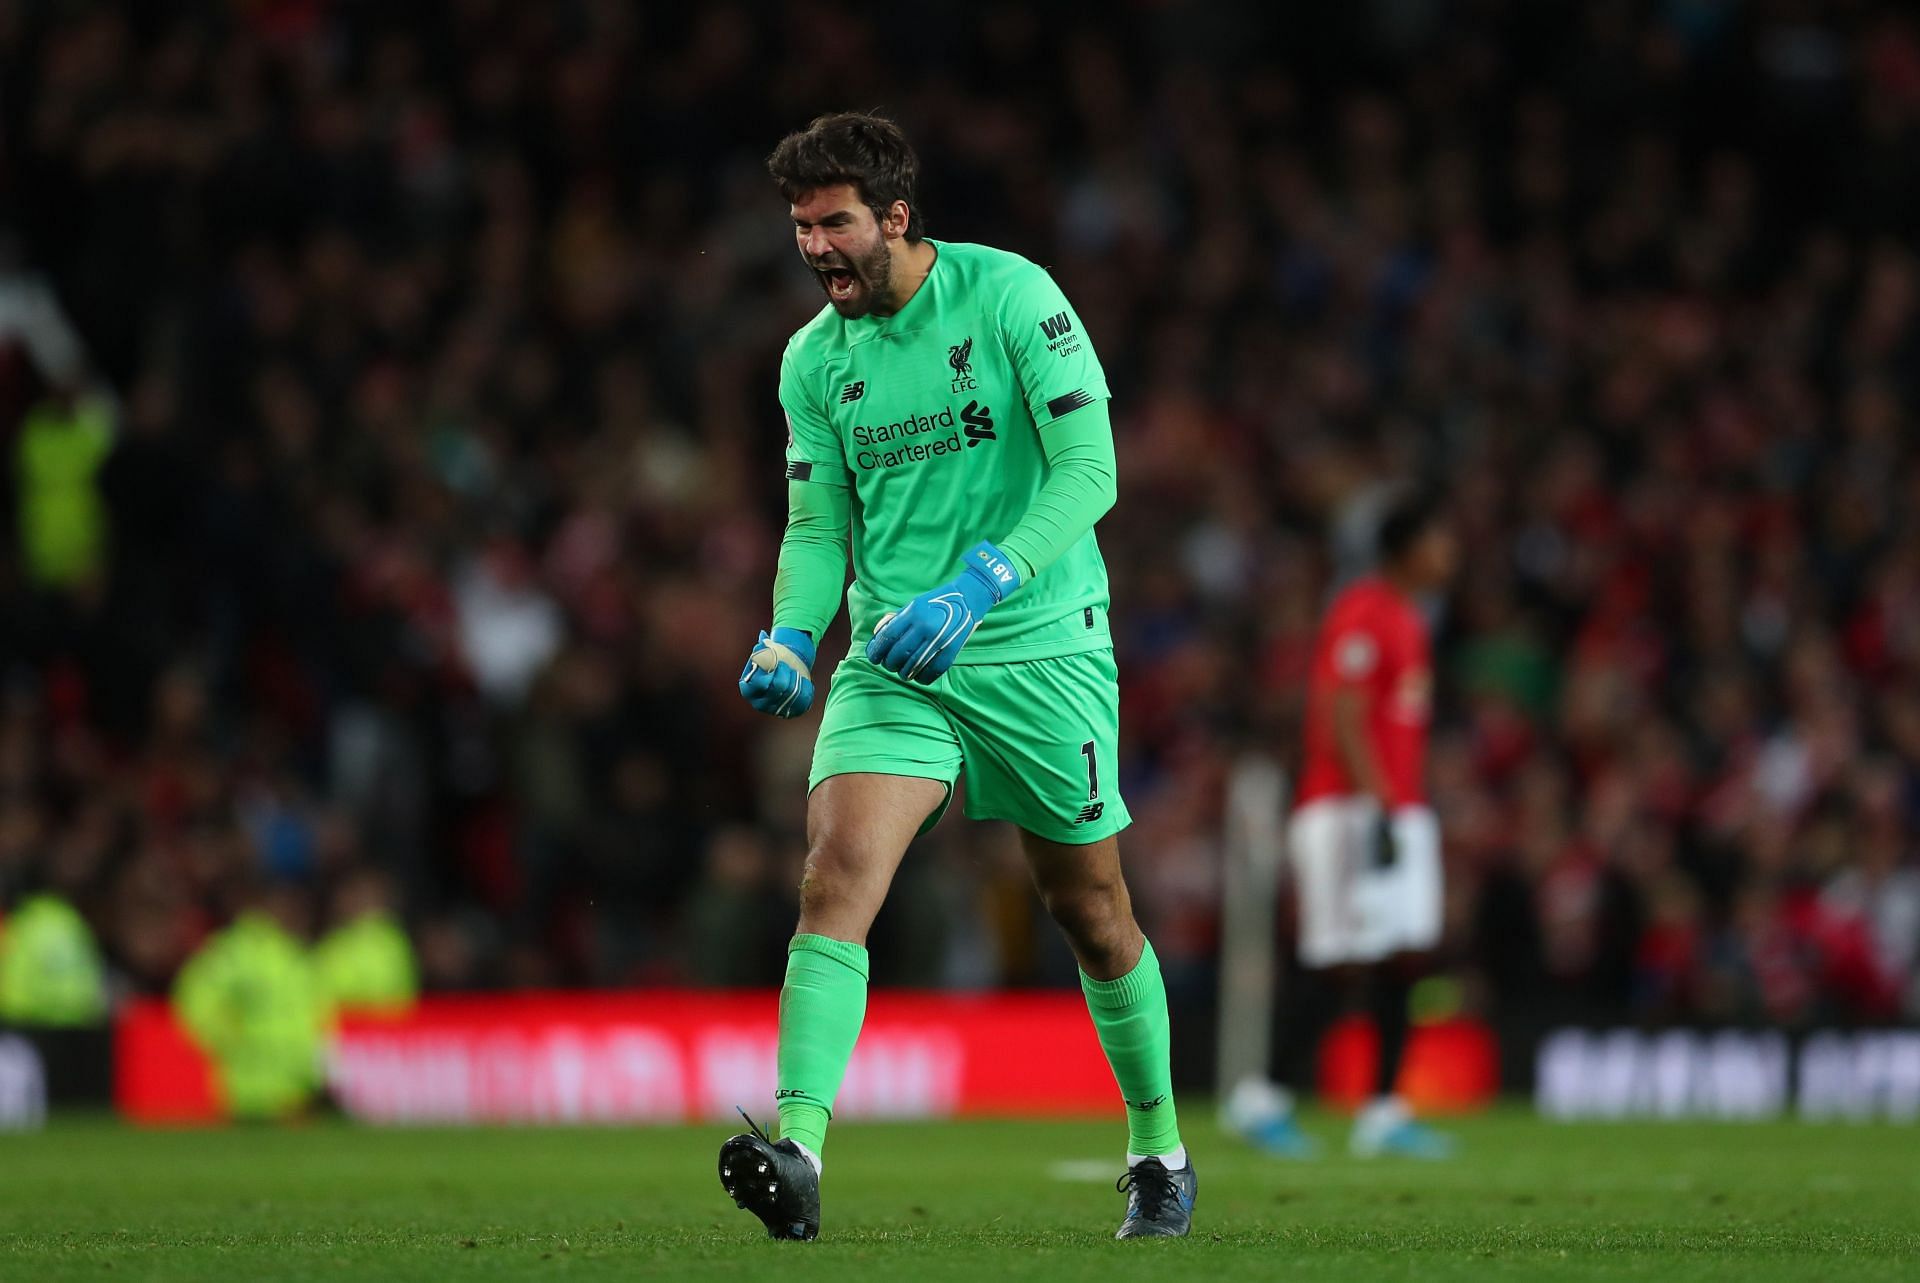 Alisson Becker has been excellent for Liverpool